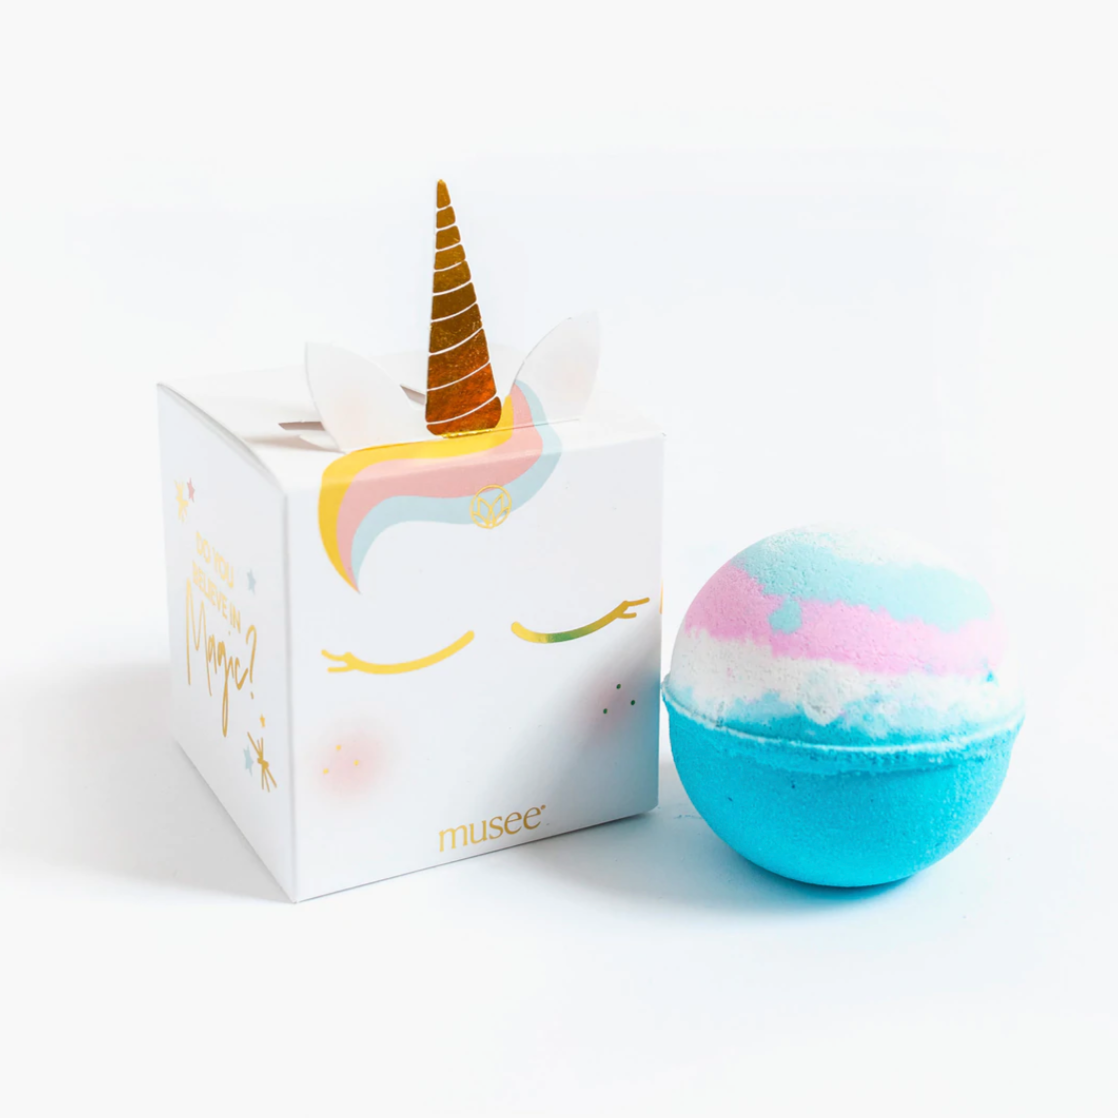 Image shows the packing of the Unicorn Bath Bomb to the left, at a slight slant with the side showing which reads &quot;Do you believe in magic?&quot; and the blue, pink and white bath bomb to the right.